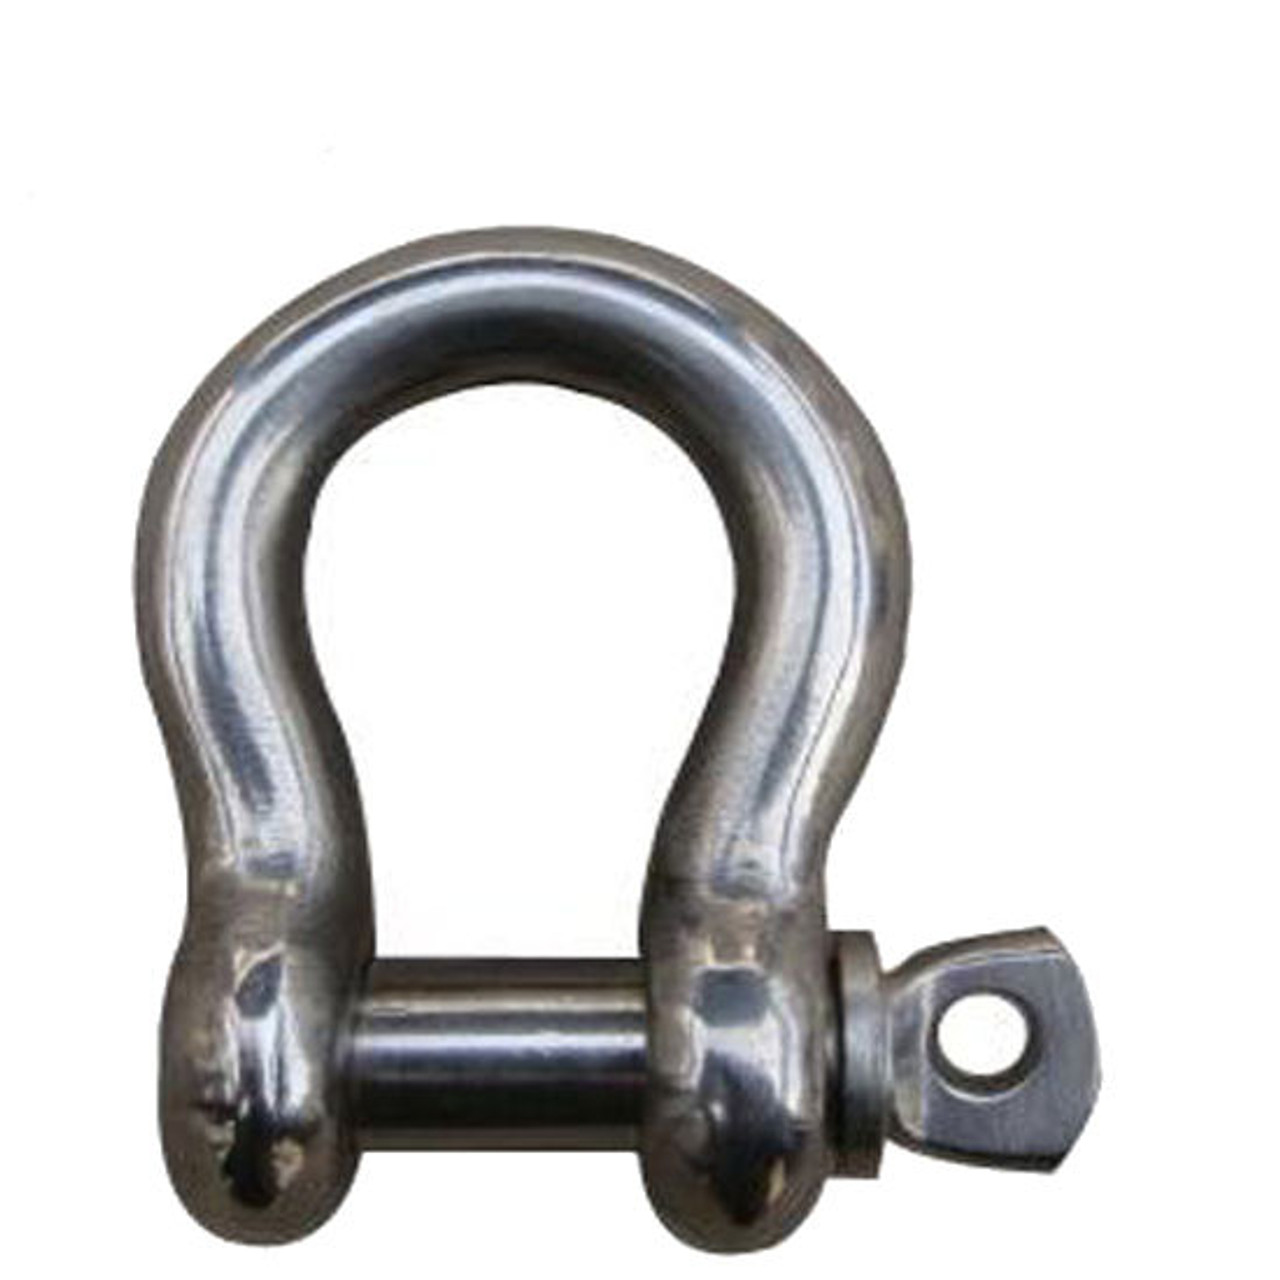 10 Pack 5/16” US BOW SHACKLE 1,000 Pound WLL BOAT MARINE Hot Dipped Galvanized 